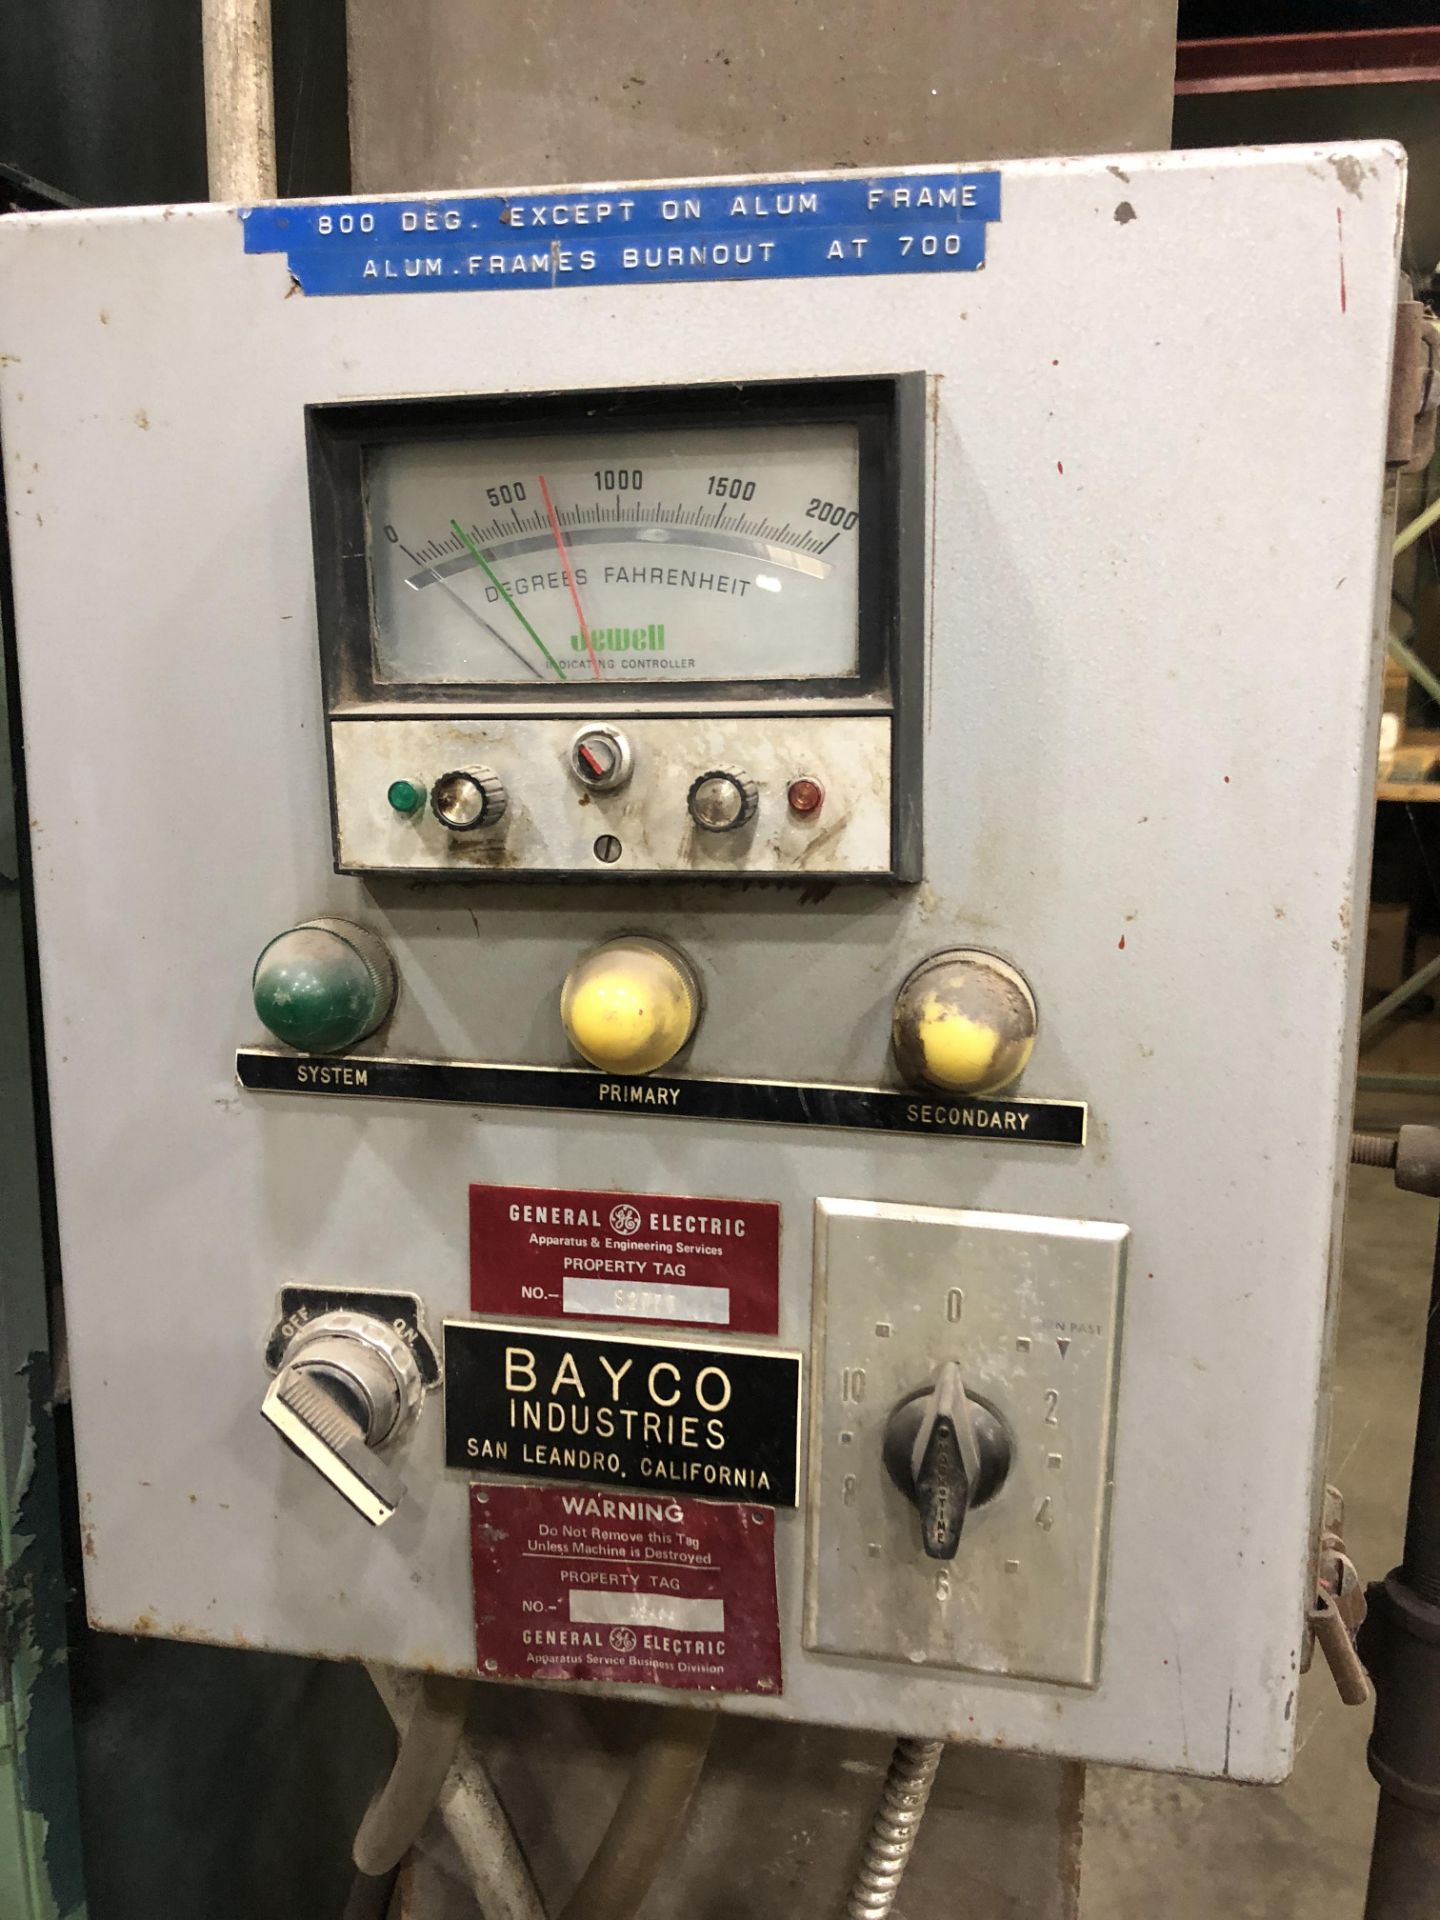 BAYCO INDUSTRIES OVEN APPROX 5 1/2'W X 6 1/2' L X 8' H; 18 KW HEAT - Image 3 of 8